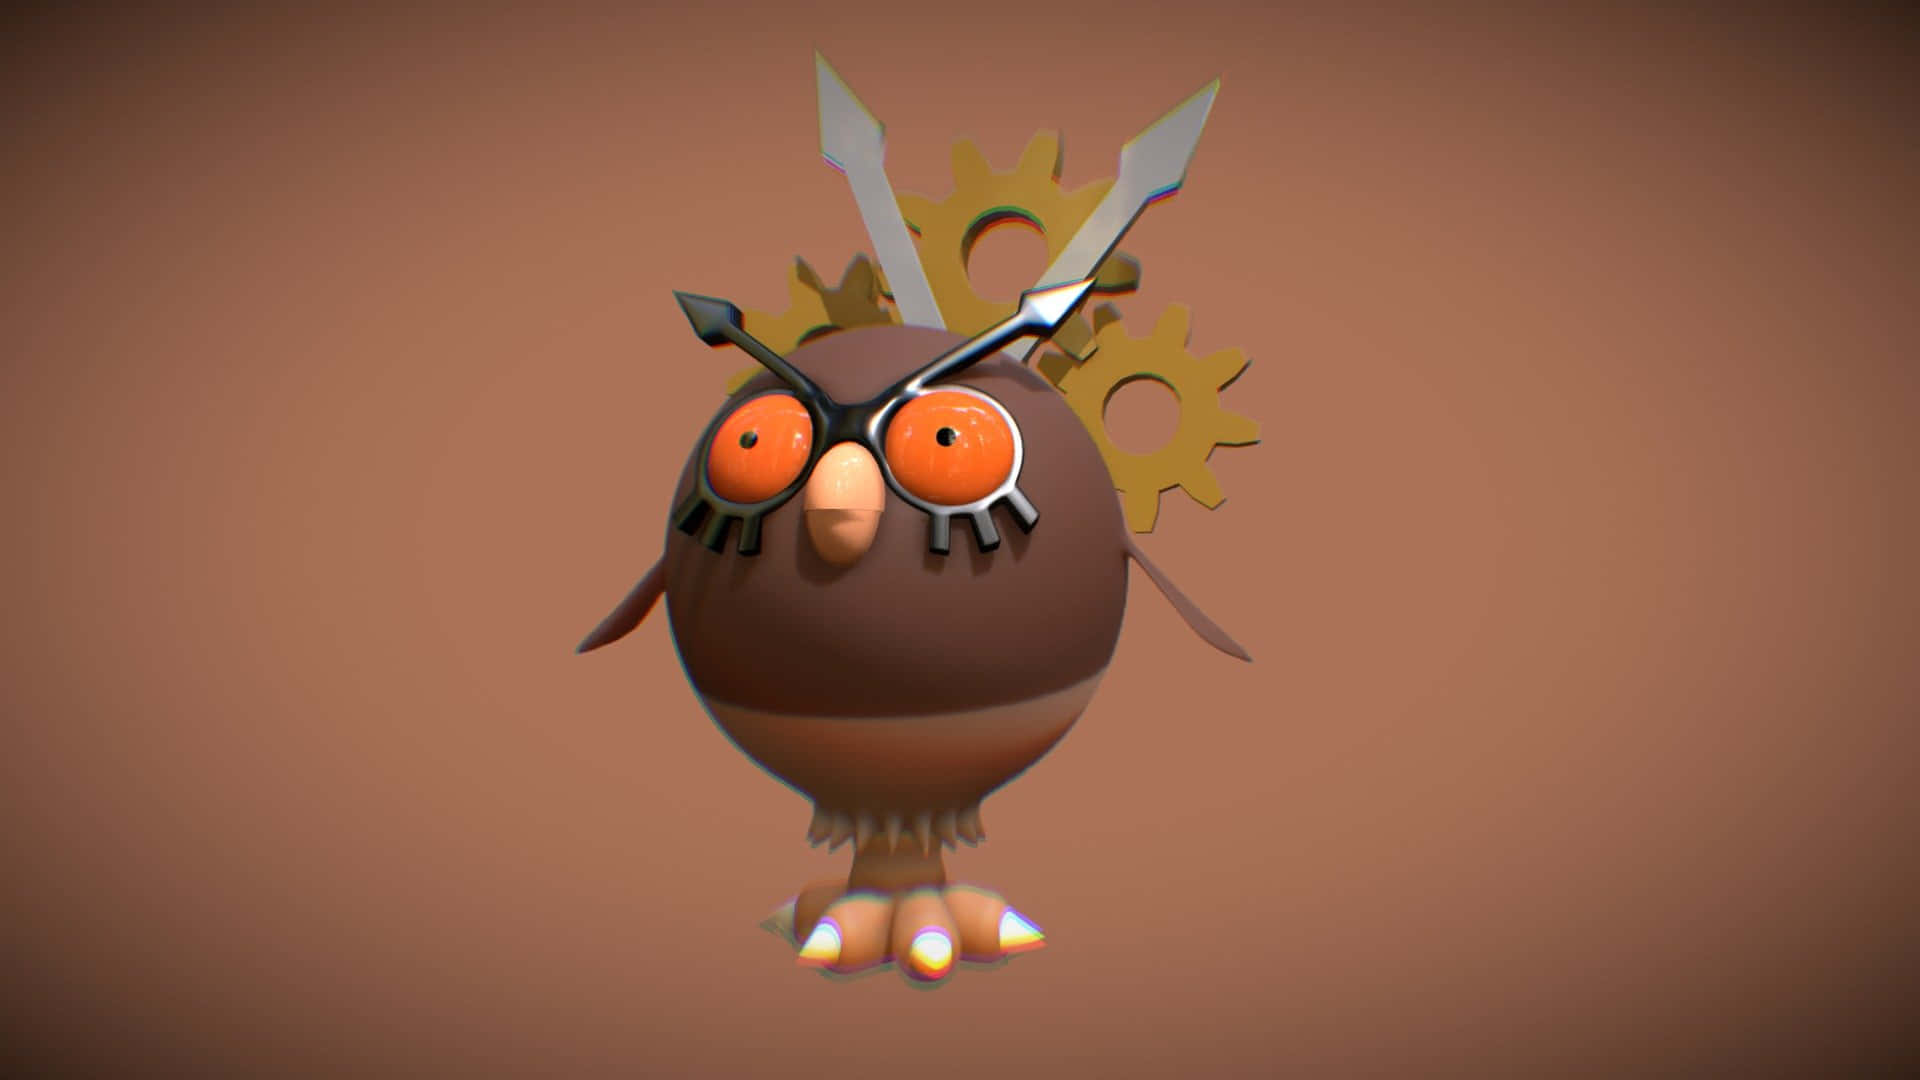 3D Model of Hoothoot on Brown Background Wallpaper